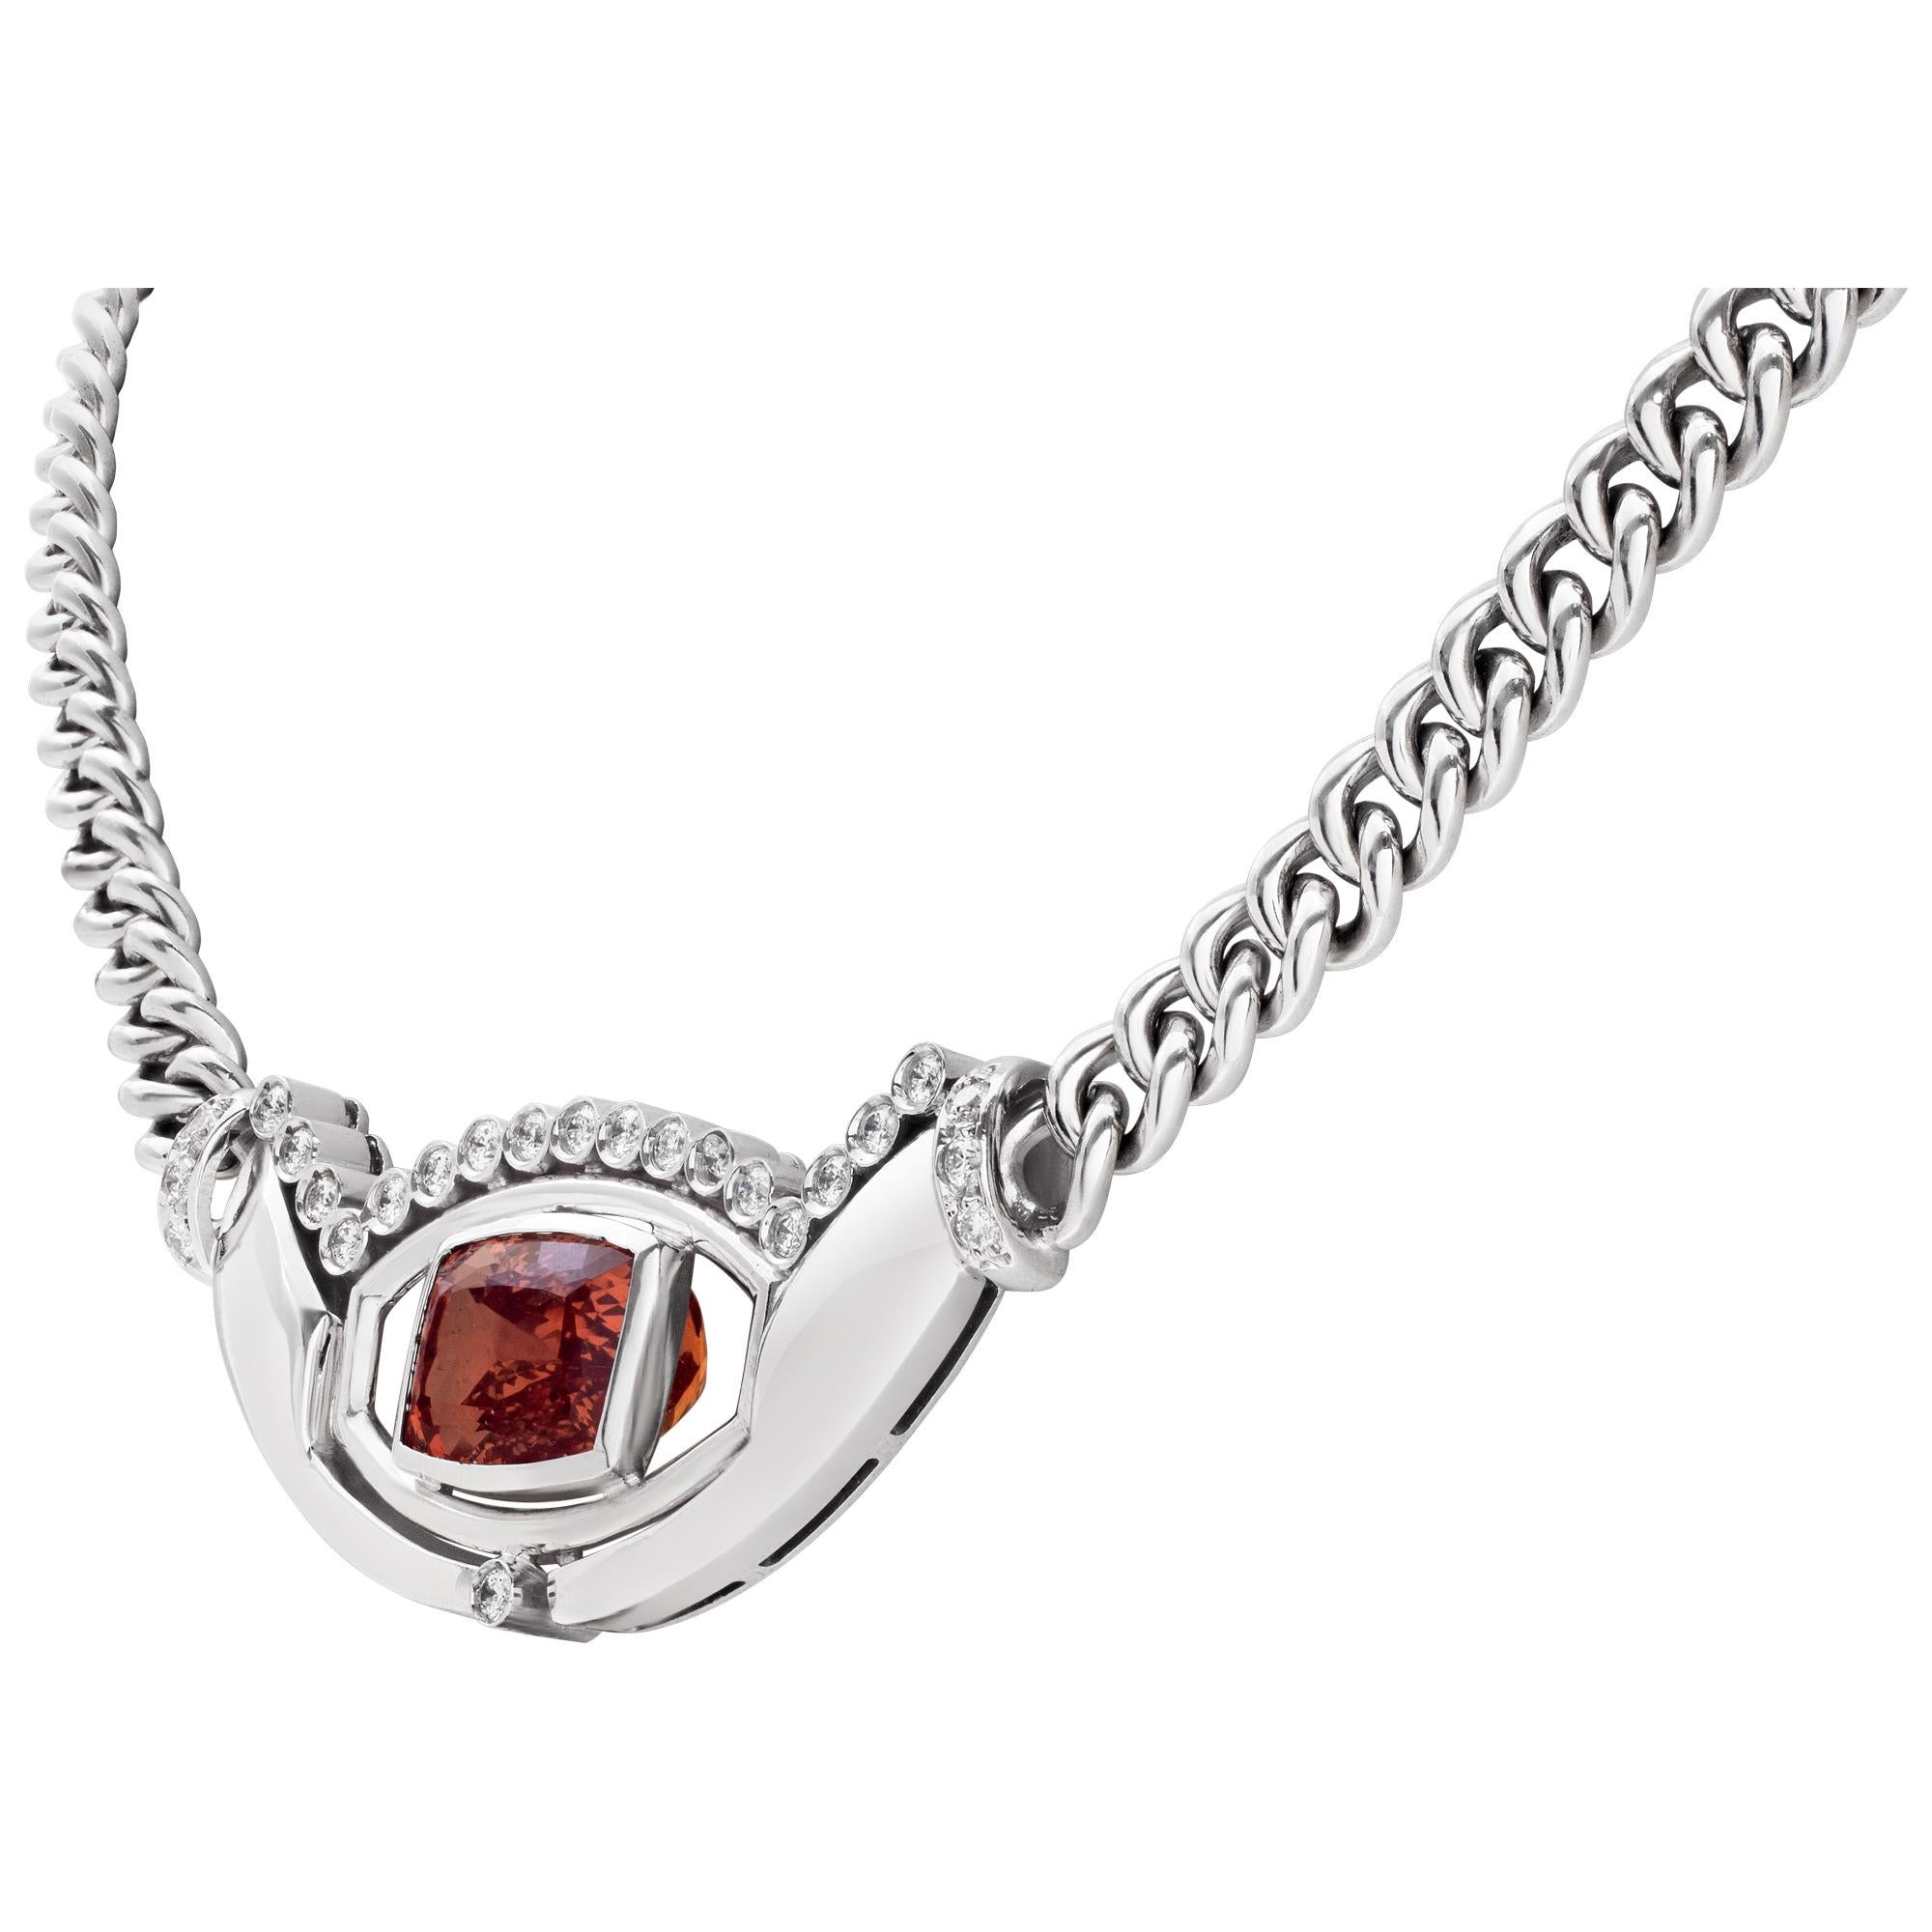 Brilliant cushion cut Imperial Topaz  & diamonds necklace set in 18k white gold. Round brilliant cut diamonds total approx weitght: 1.00 carat, estimate: G-H color, VS clarity. Imperial Topaz approx weight over 4 carat . Length 16 inches.
